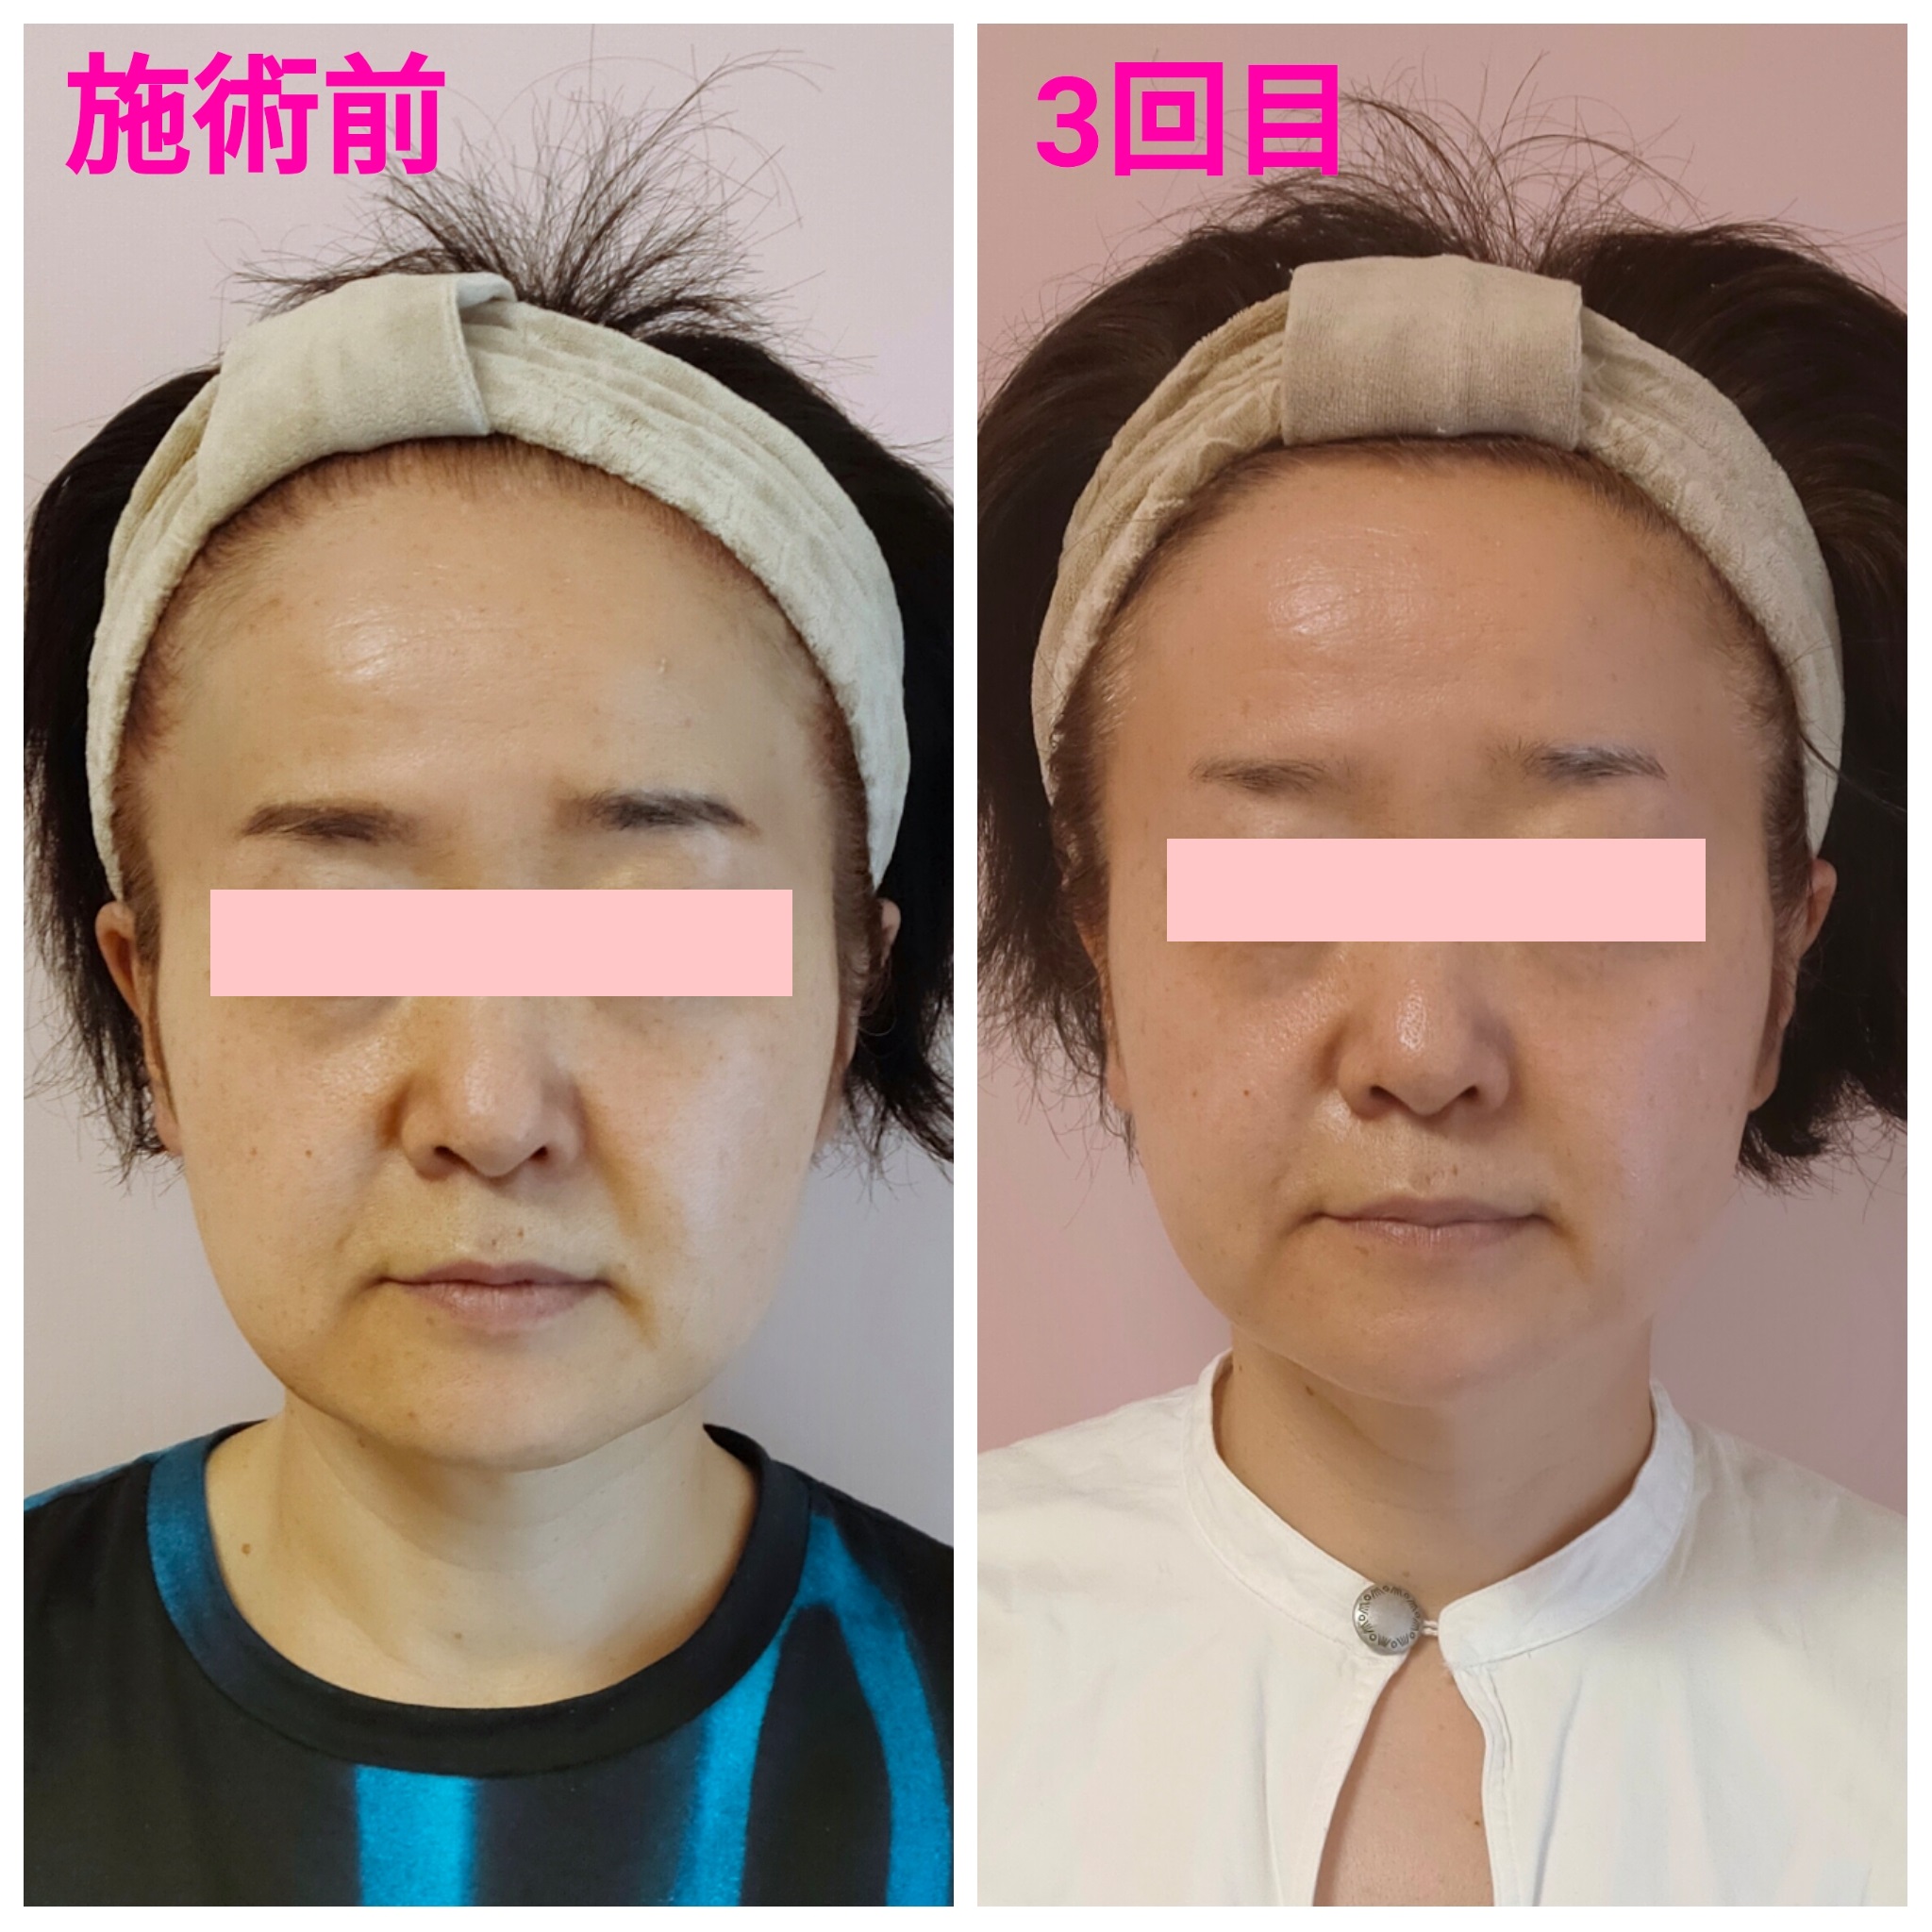 BeforeAfter画像